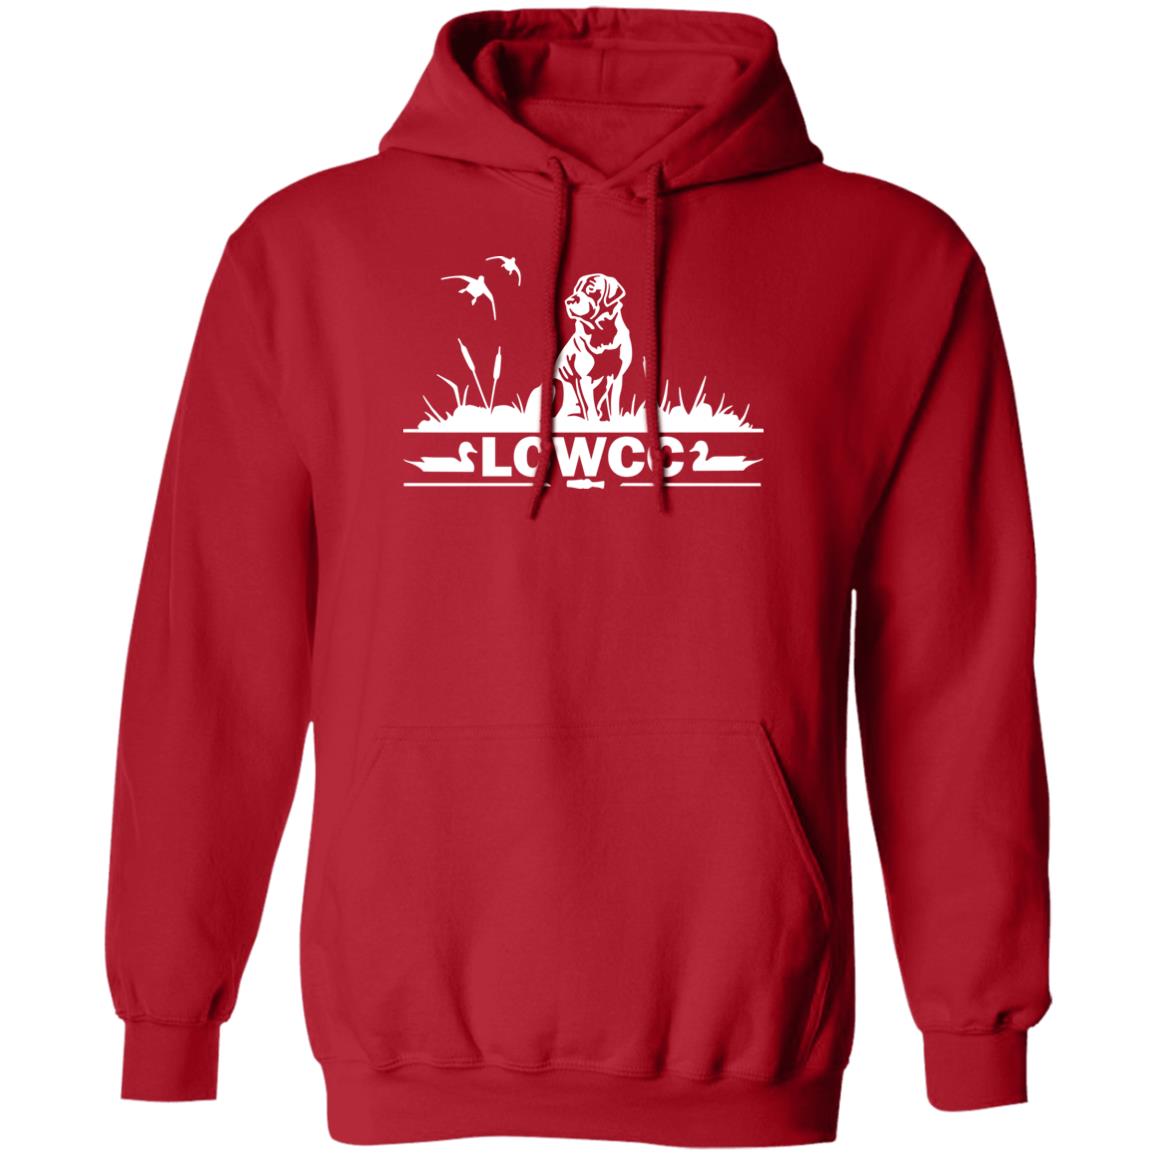 LCWCC Dog - White G185 Pullover Hoodie